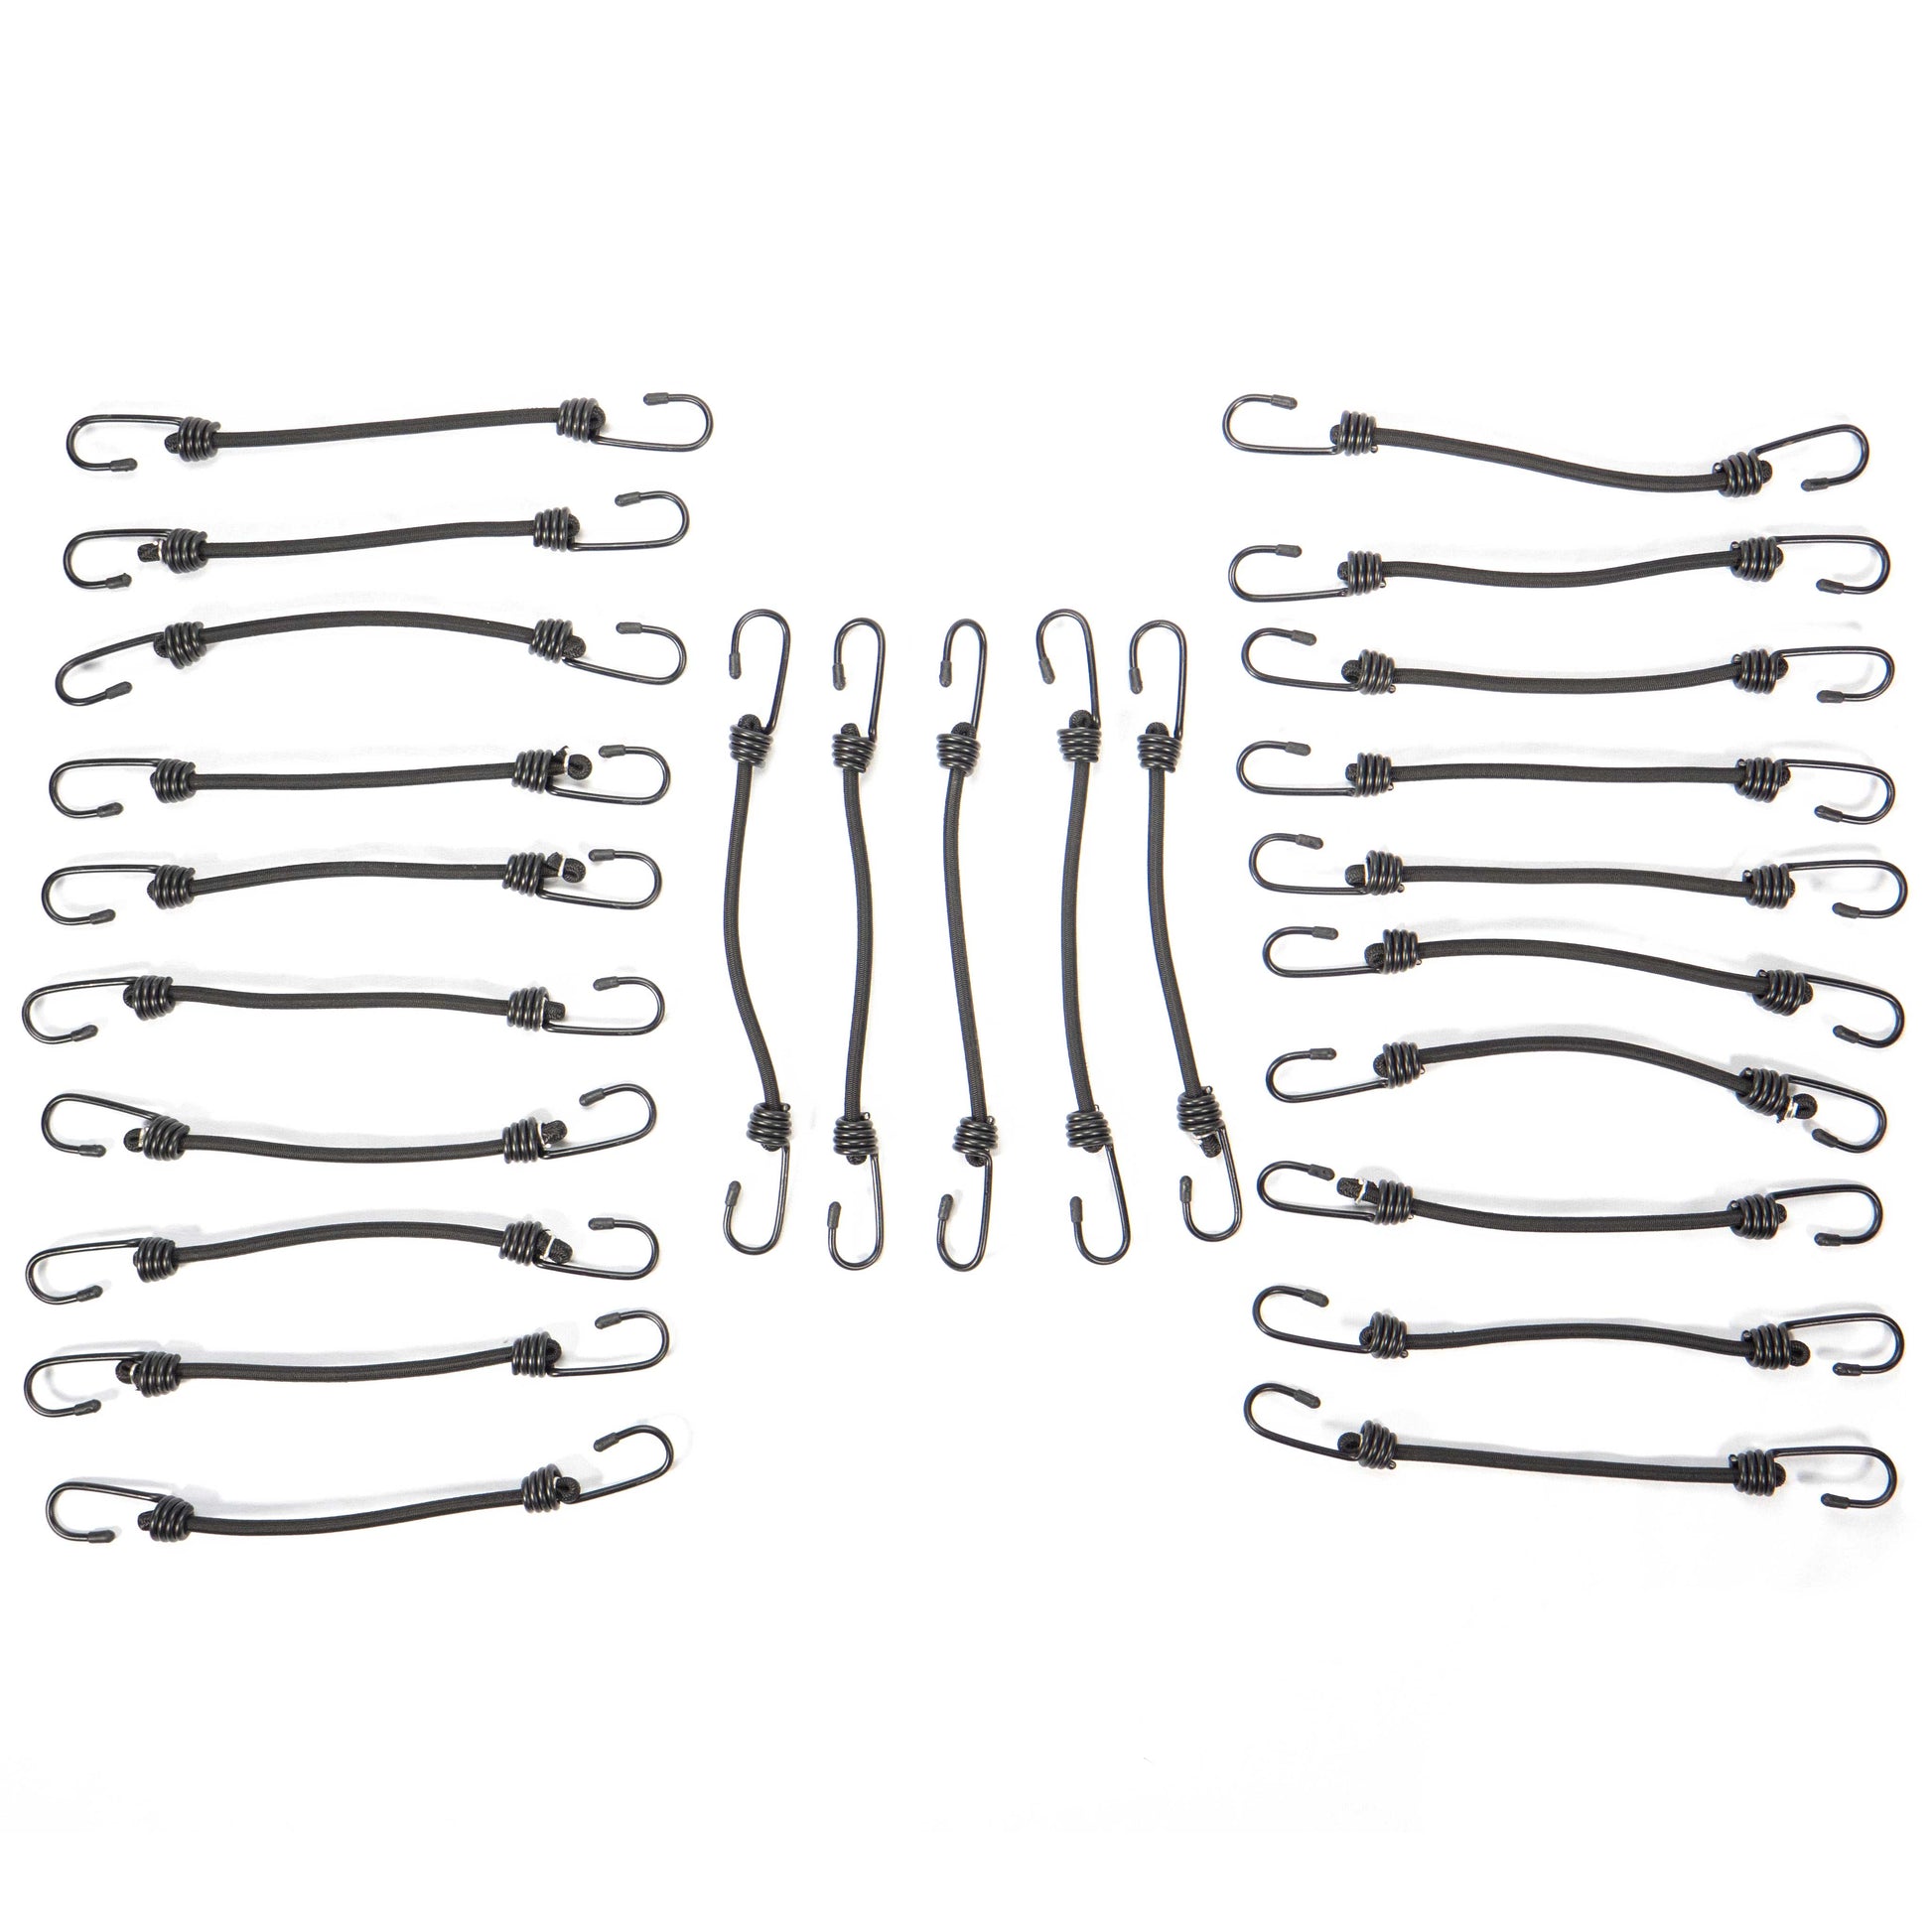 50 Pack High Strength Fishing Snaps Fishing Power Clips Stainless